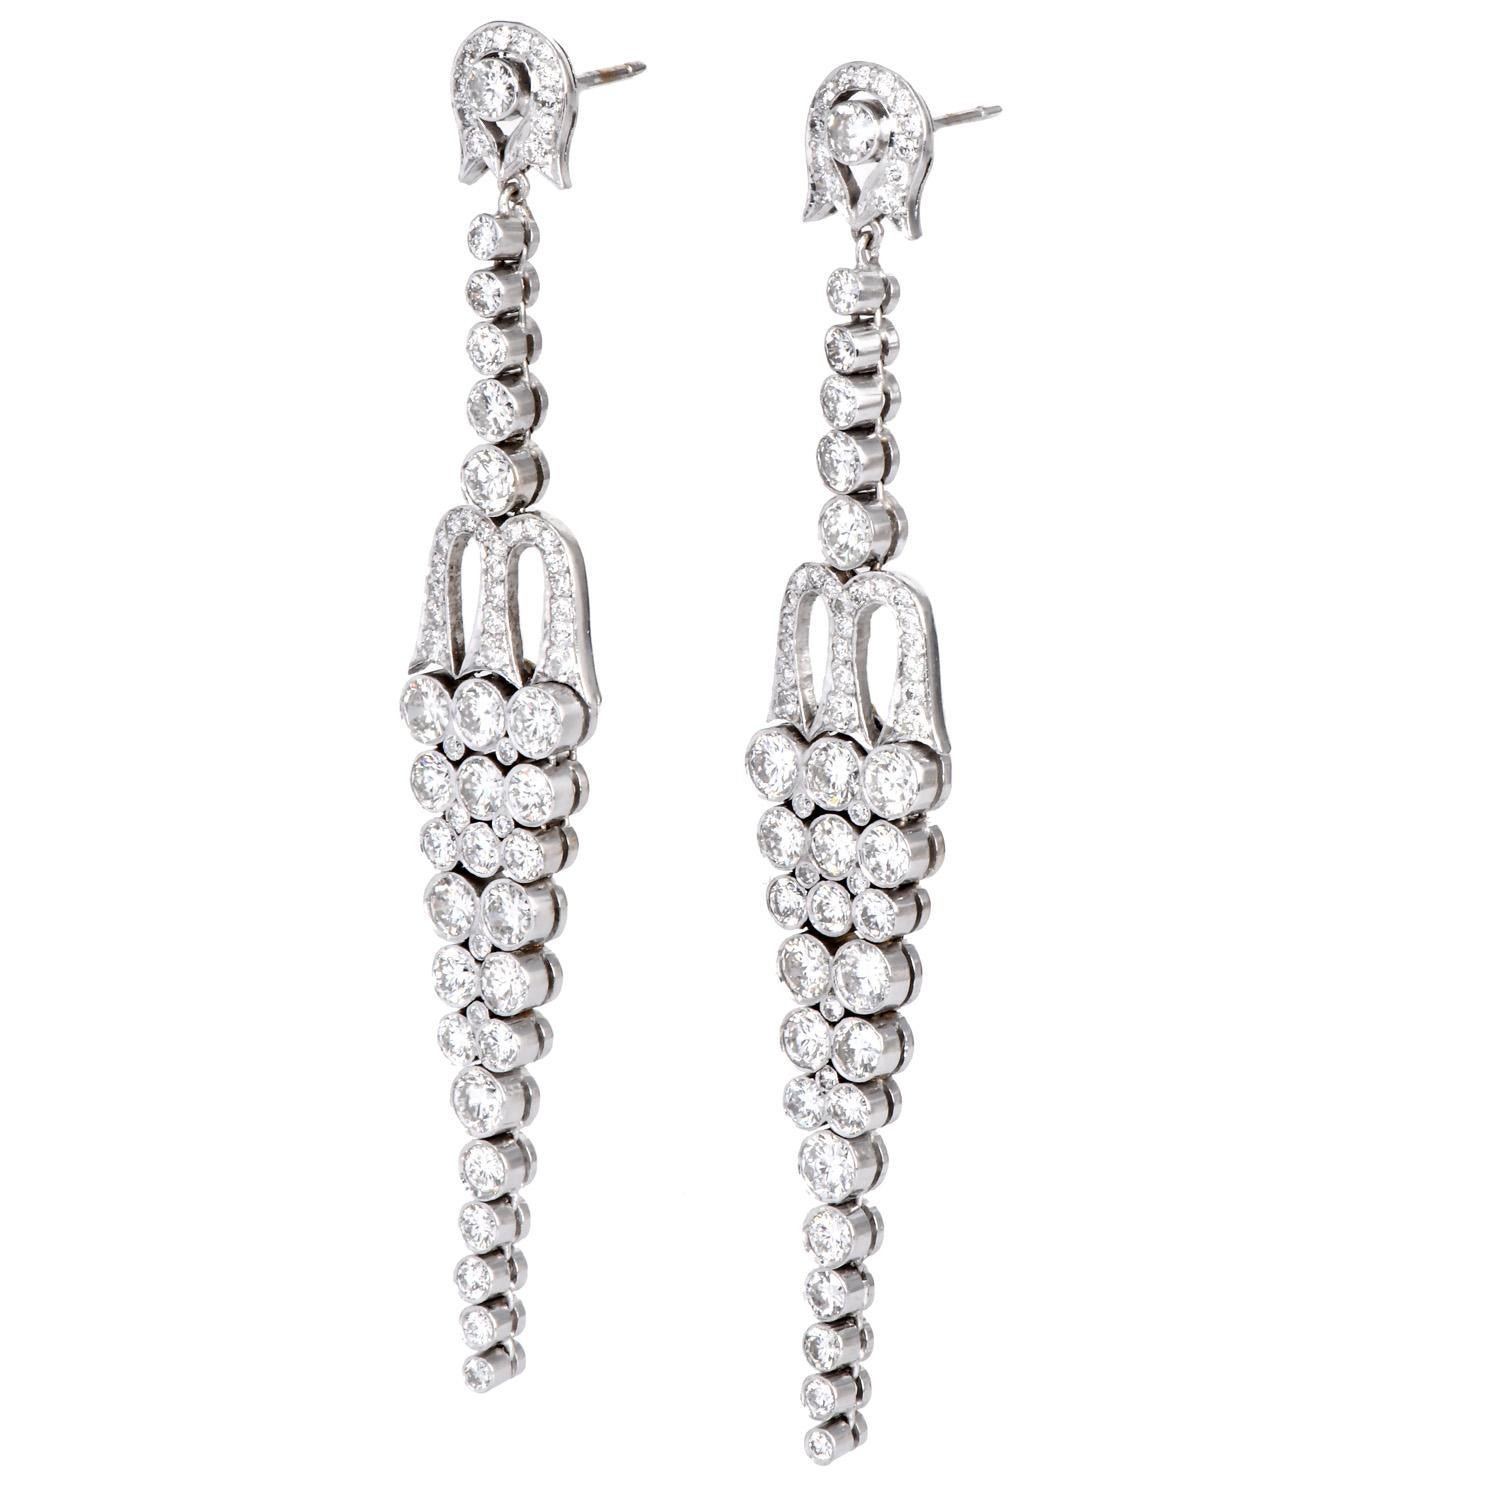 Featuring vintage dangle drop earrings expertly crafted in Platinum are breathtakingly stunning, drawing inspiration from grapevines.

These Deco earrings feature a long, elegant, and classy dangle drop design that will elevate and outshine your